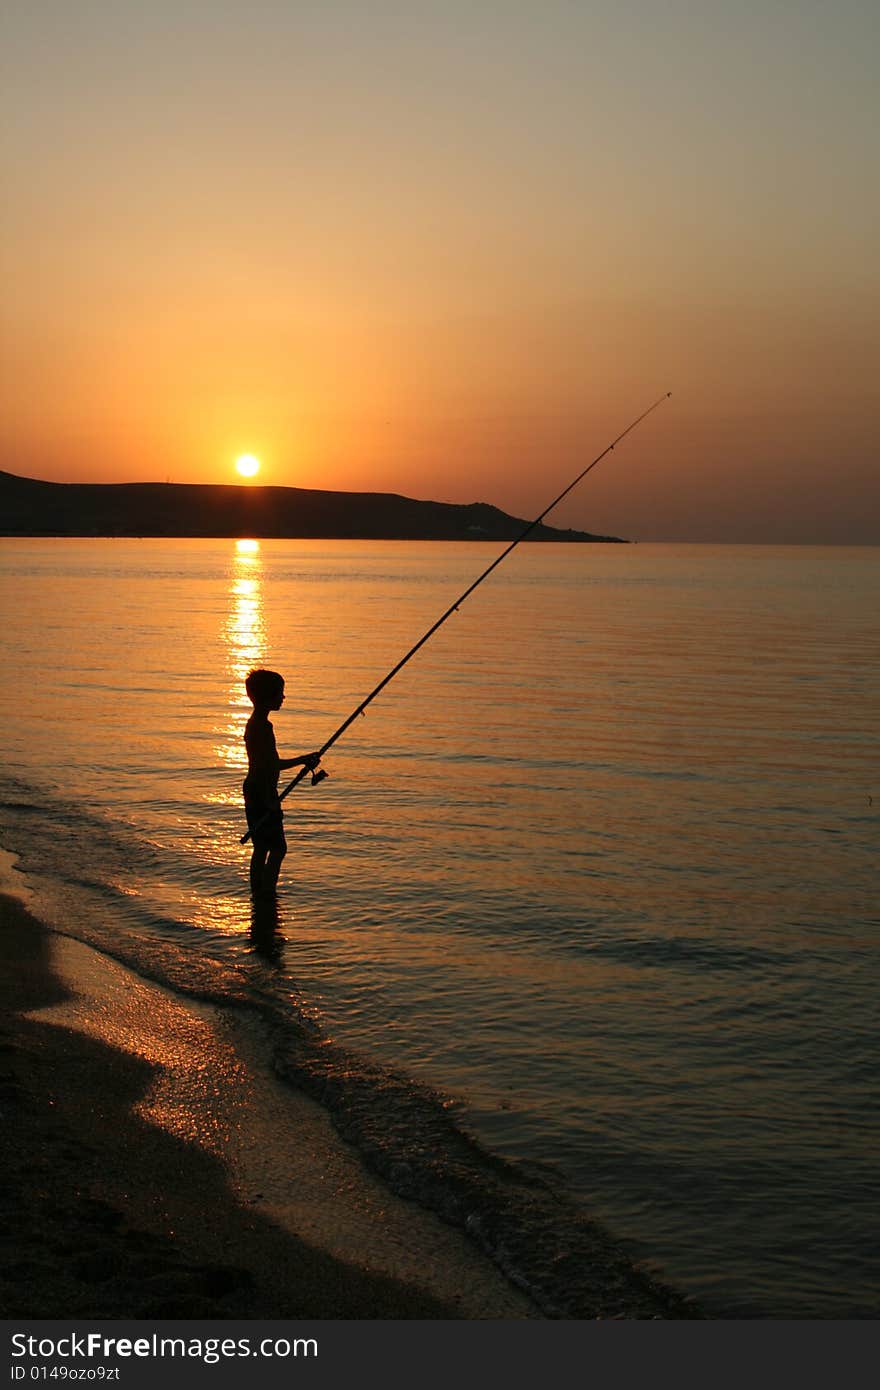 The silhouette of one fisherboy on the Sea of Azov against the background of the  sundown and mountains. The silhouette of one fisherboy on the Sea of Azov against the background of the  sundown and mountains.